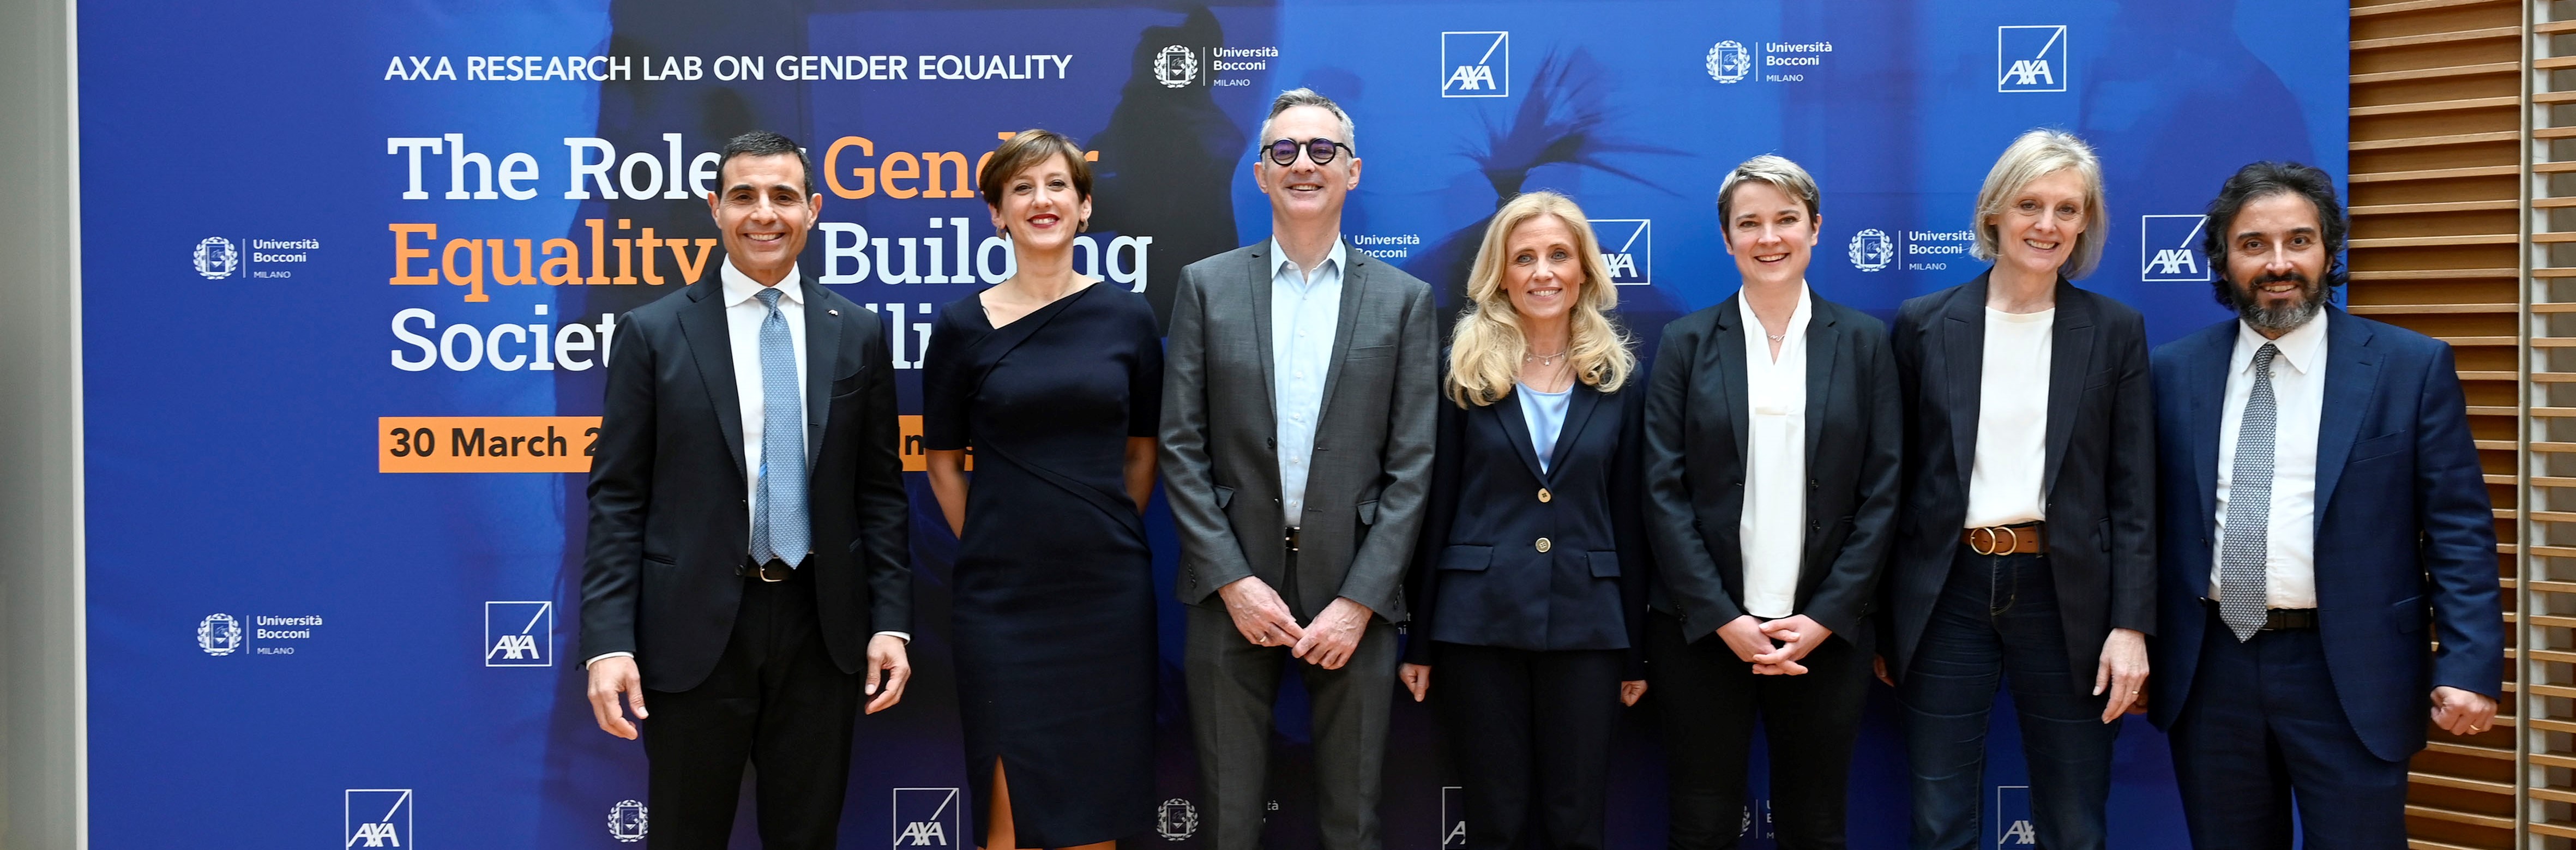 AXA e Bocconi still together: “The role of Gender Equality in building societal resilience”